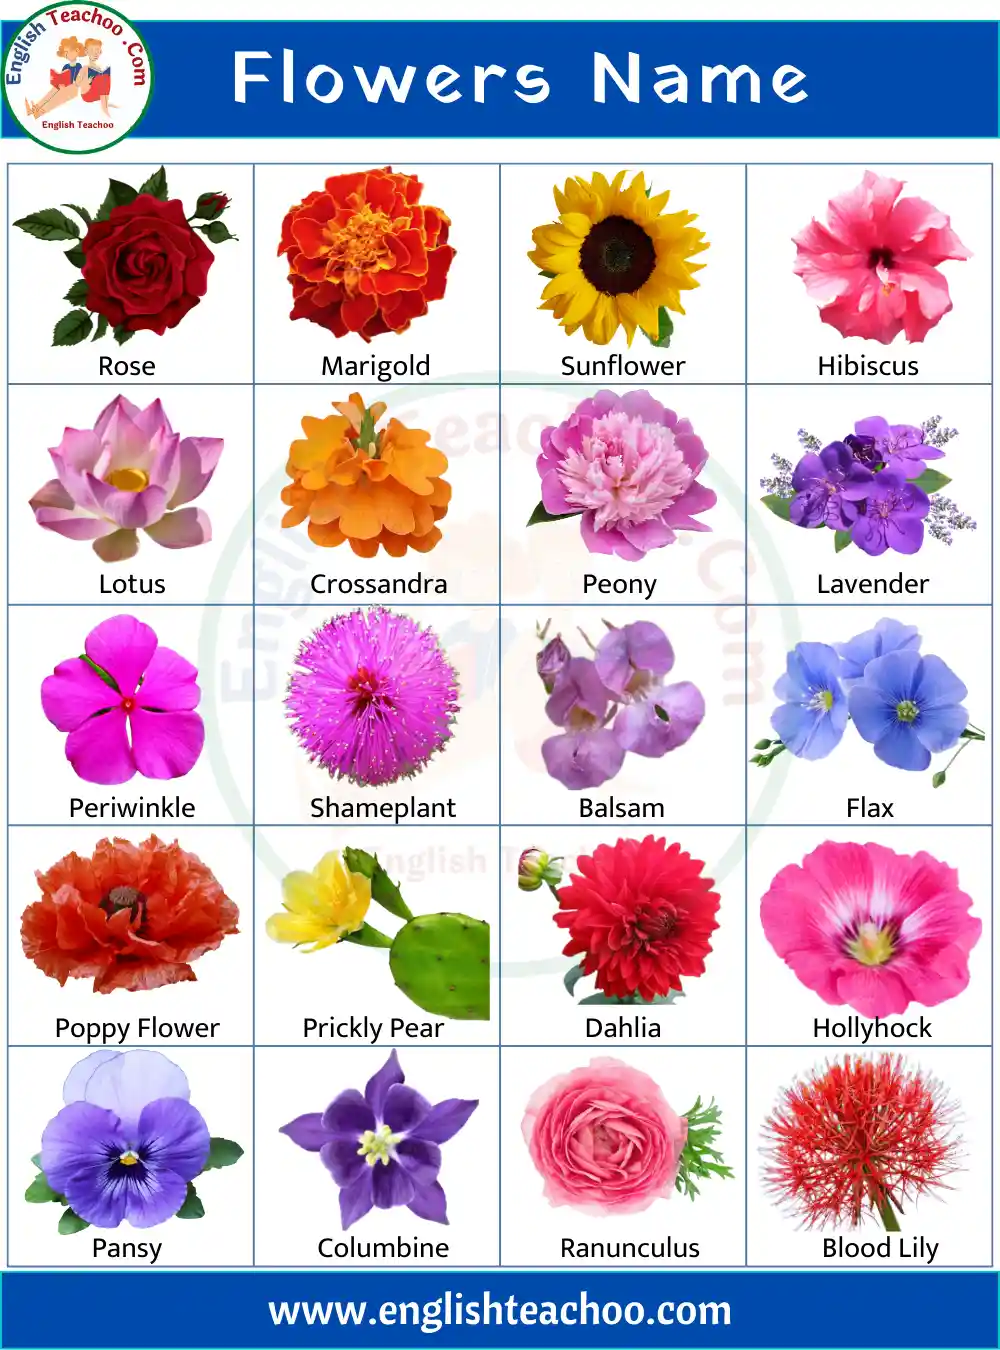 100 Flowers Name in English with Pictures - EnglishTeachoo